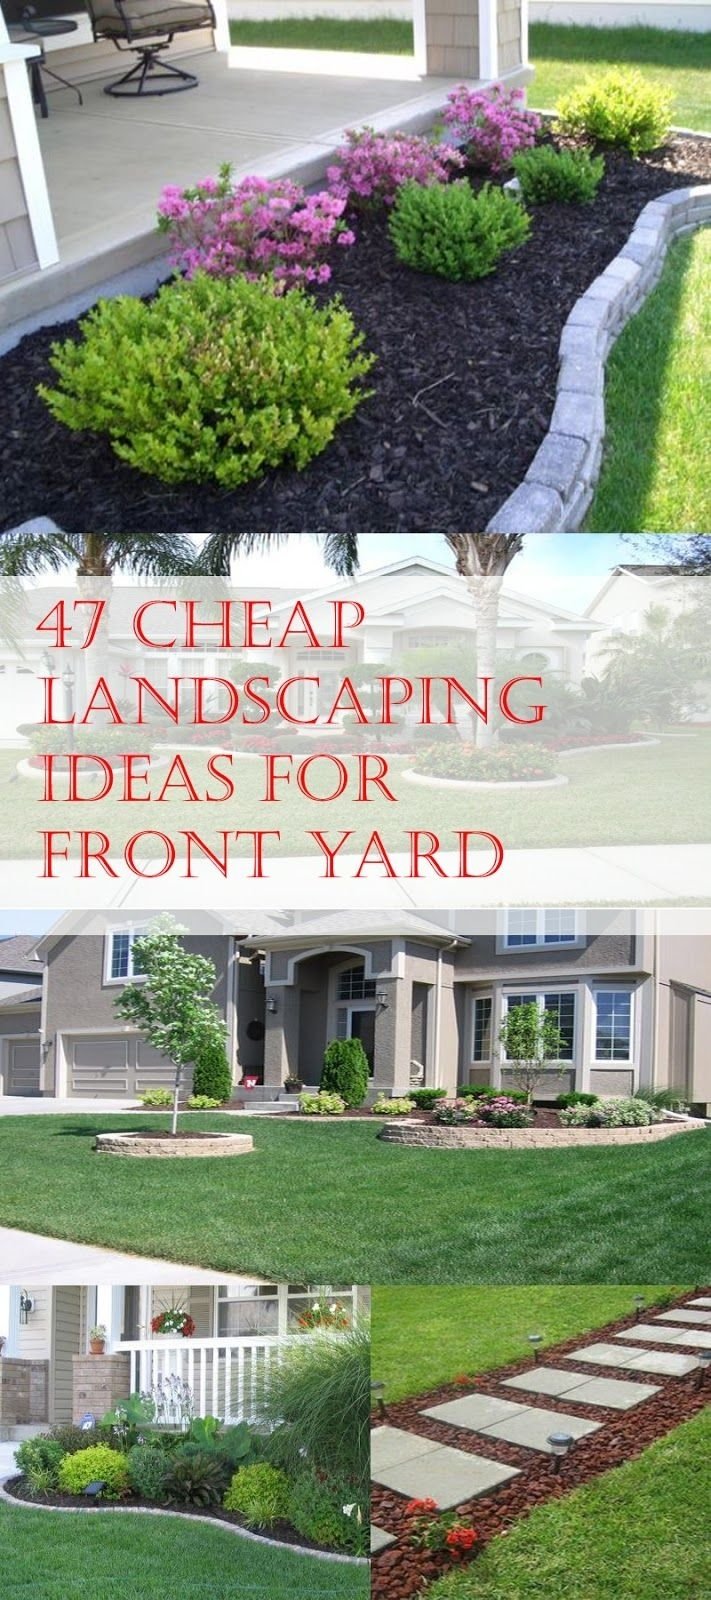 10 Pretty Small Front Yard Landscaping Ideas On A Budget 47 cheap landscaping ideas for front yard cheap landscaping ideas 2 2024